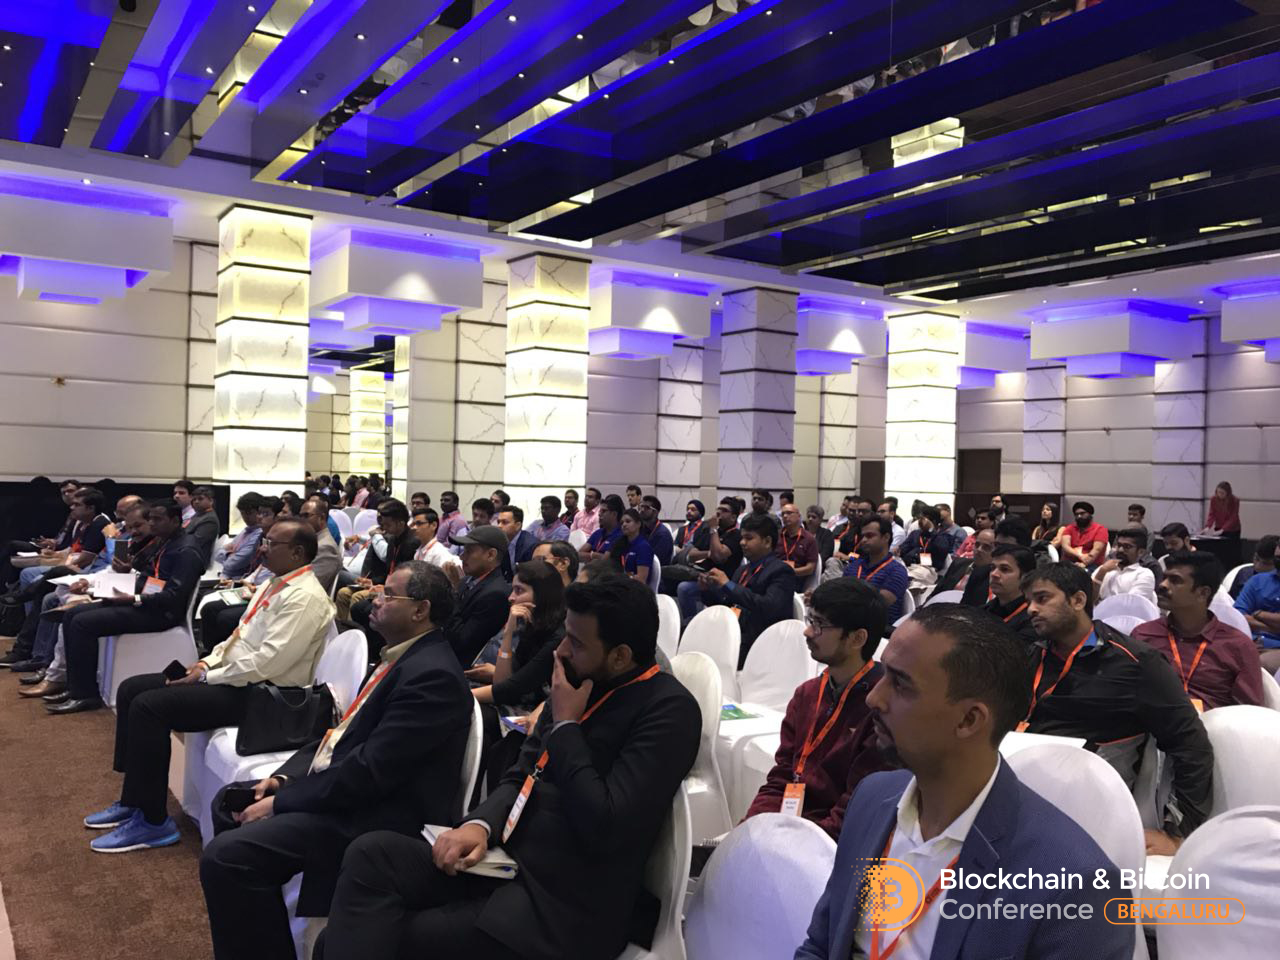 Blockchain & Bitcoin Conference Bengaluru discussed new laws in India that might touch ICO and blockchain - 1